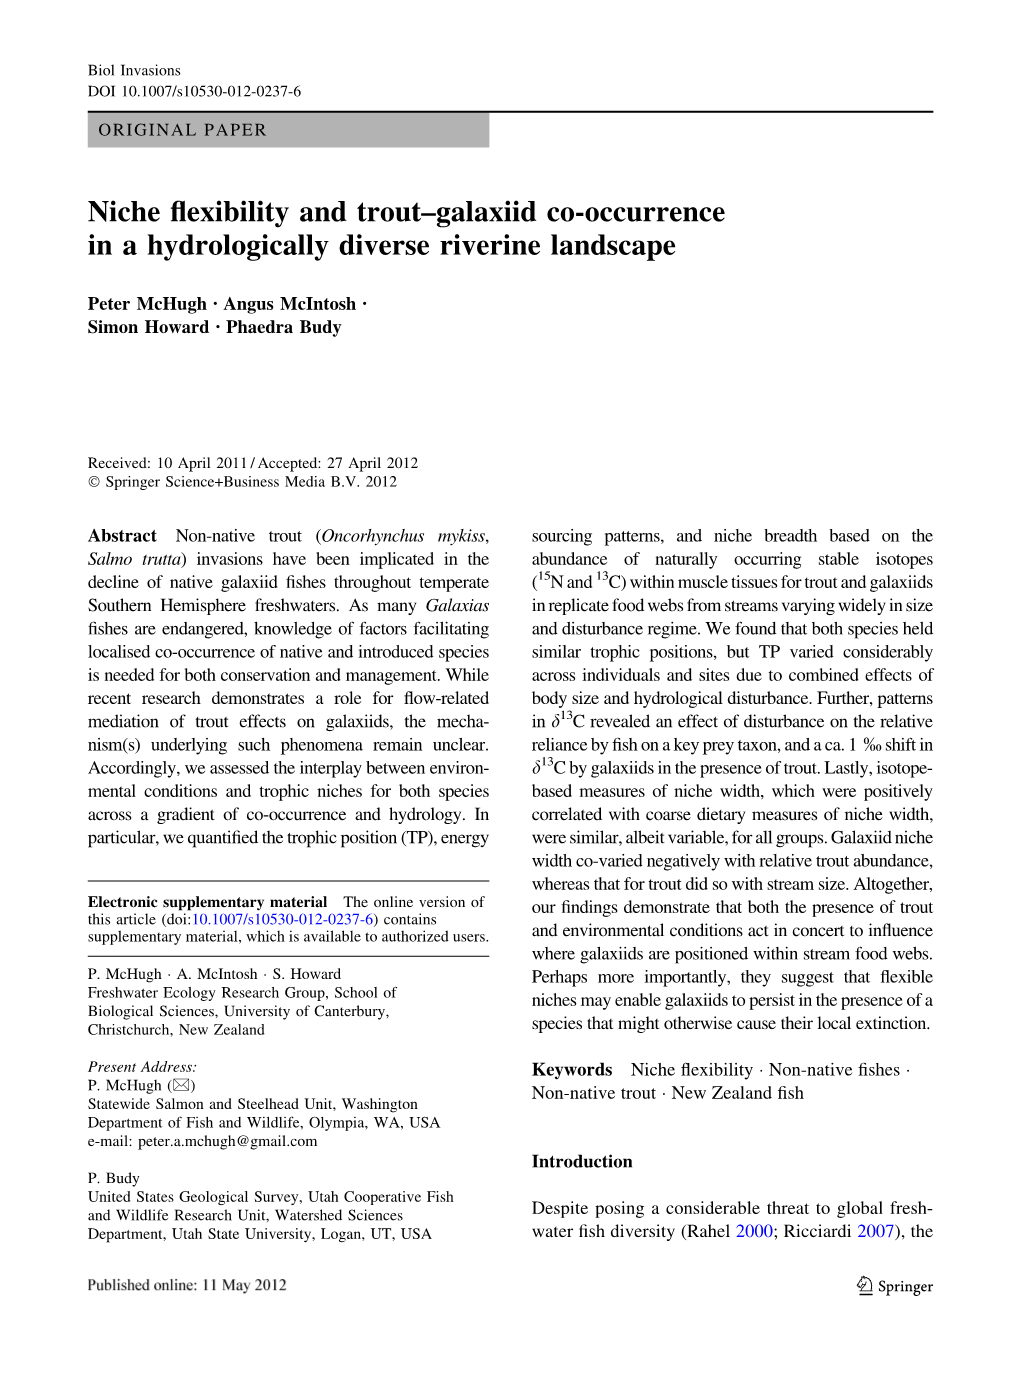 Niche Flexibility and Trout–Galaxiid Co-Occurrence in a Hydrologically Diverse Riverine Landscape